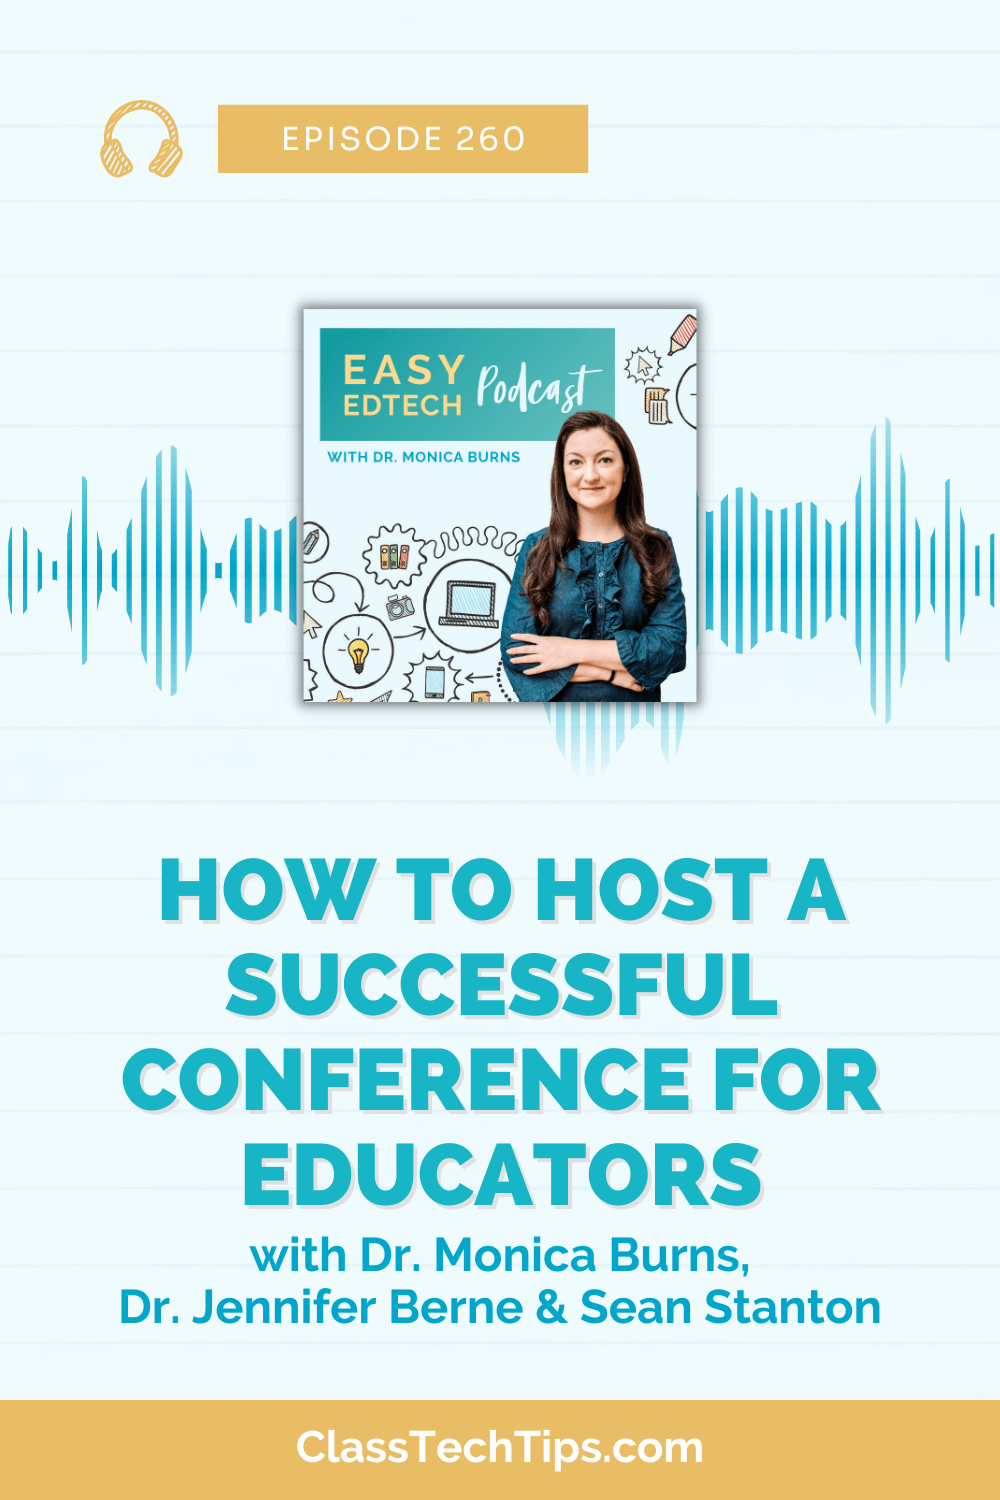 A podcast episode featuring Dr. Jennifer Berne, Assistant Professor, Sean Stanton, Founder and Event Coordinator, with the title "How to Host a Successful Conference for Educators."